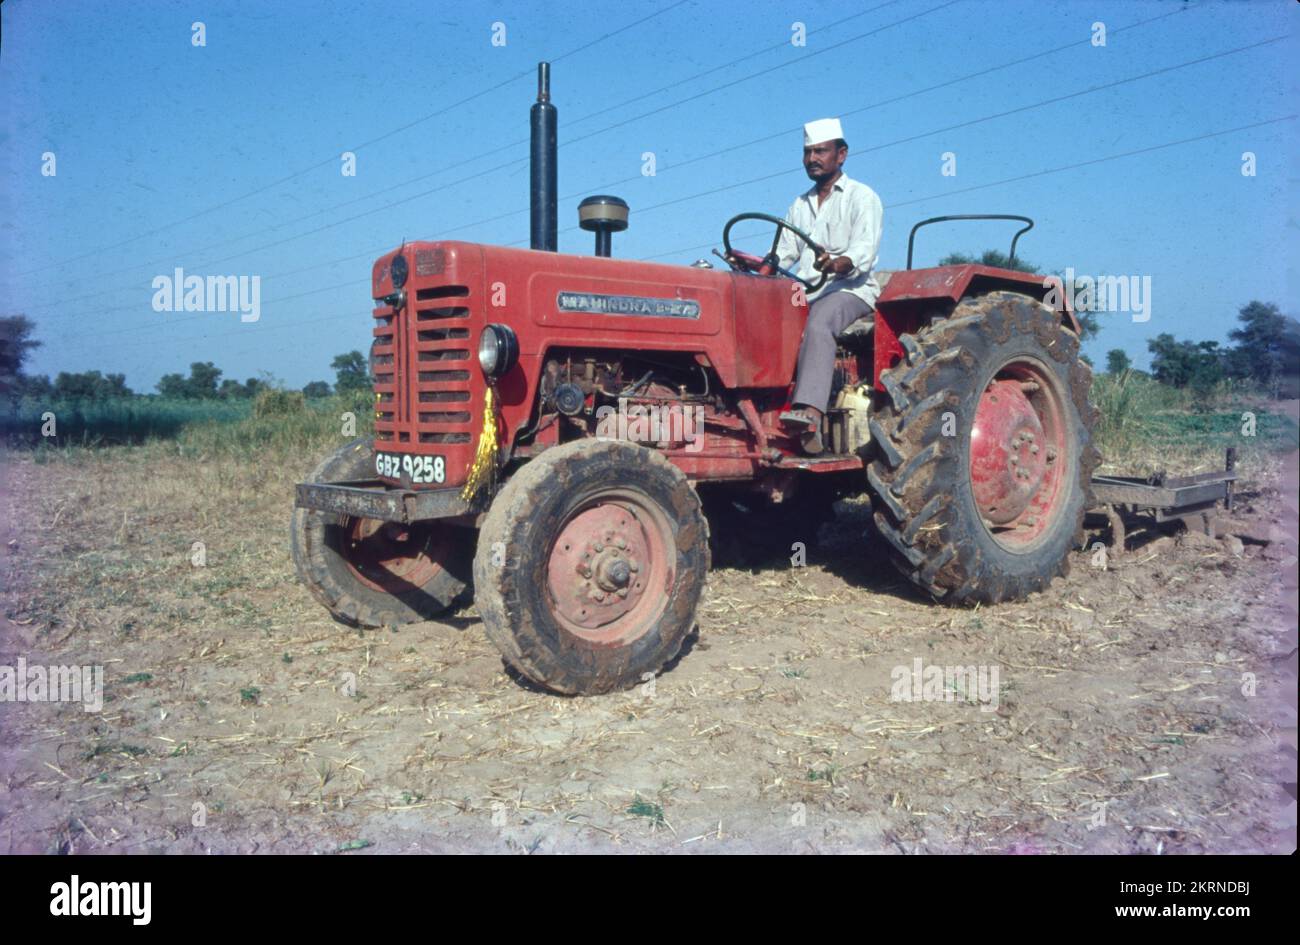 Tractors are generally associated with farming as farmers use them  alongside machinery to perform implements like ploughing, tilling, sowing,  and harrowing. In addition, a tractor is used for pushing or pulling the